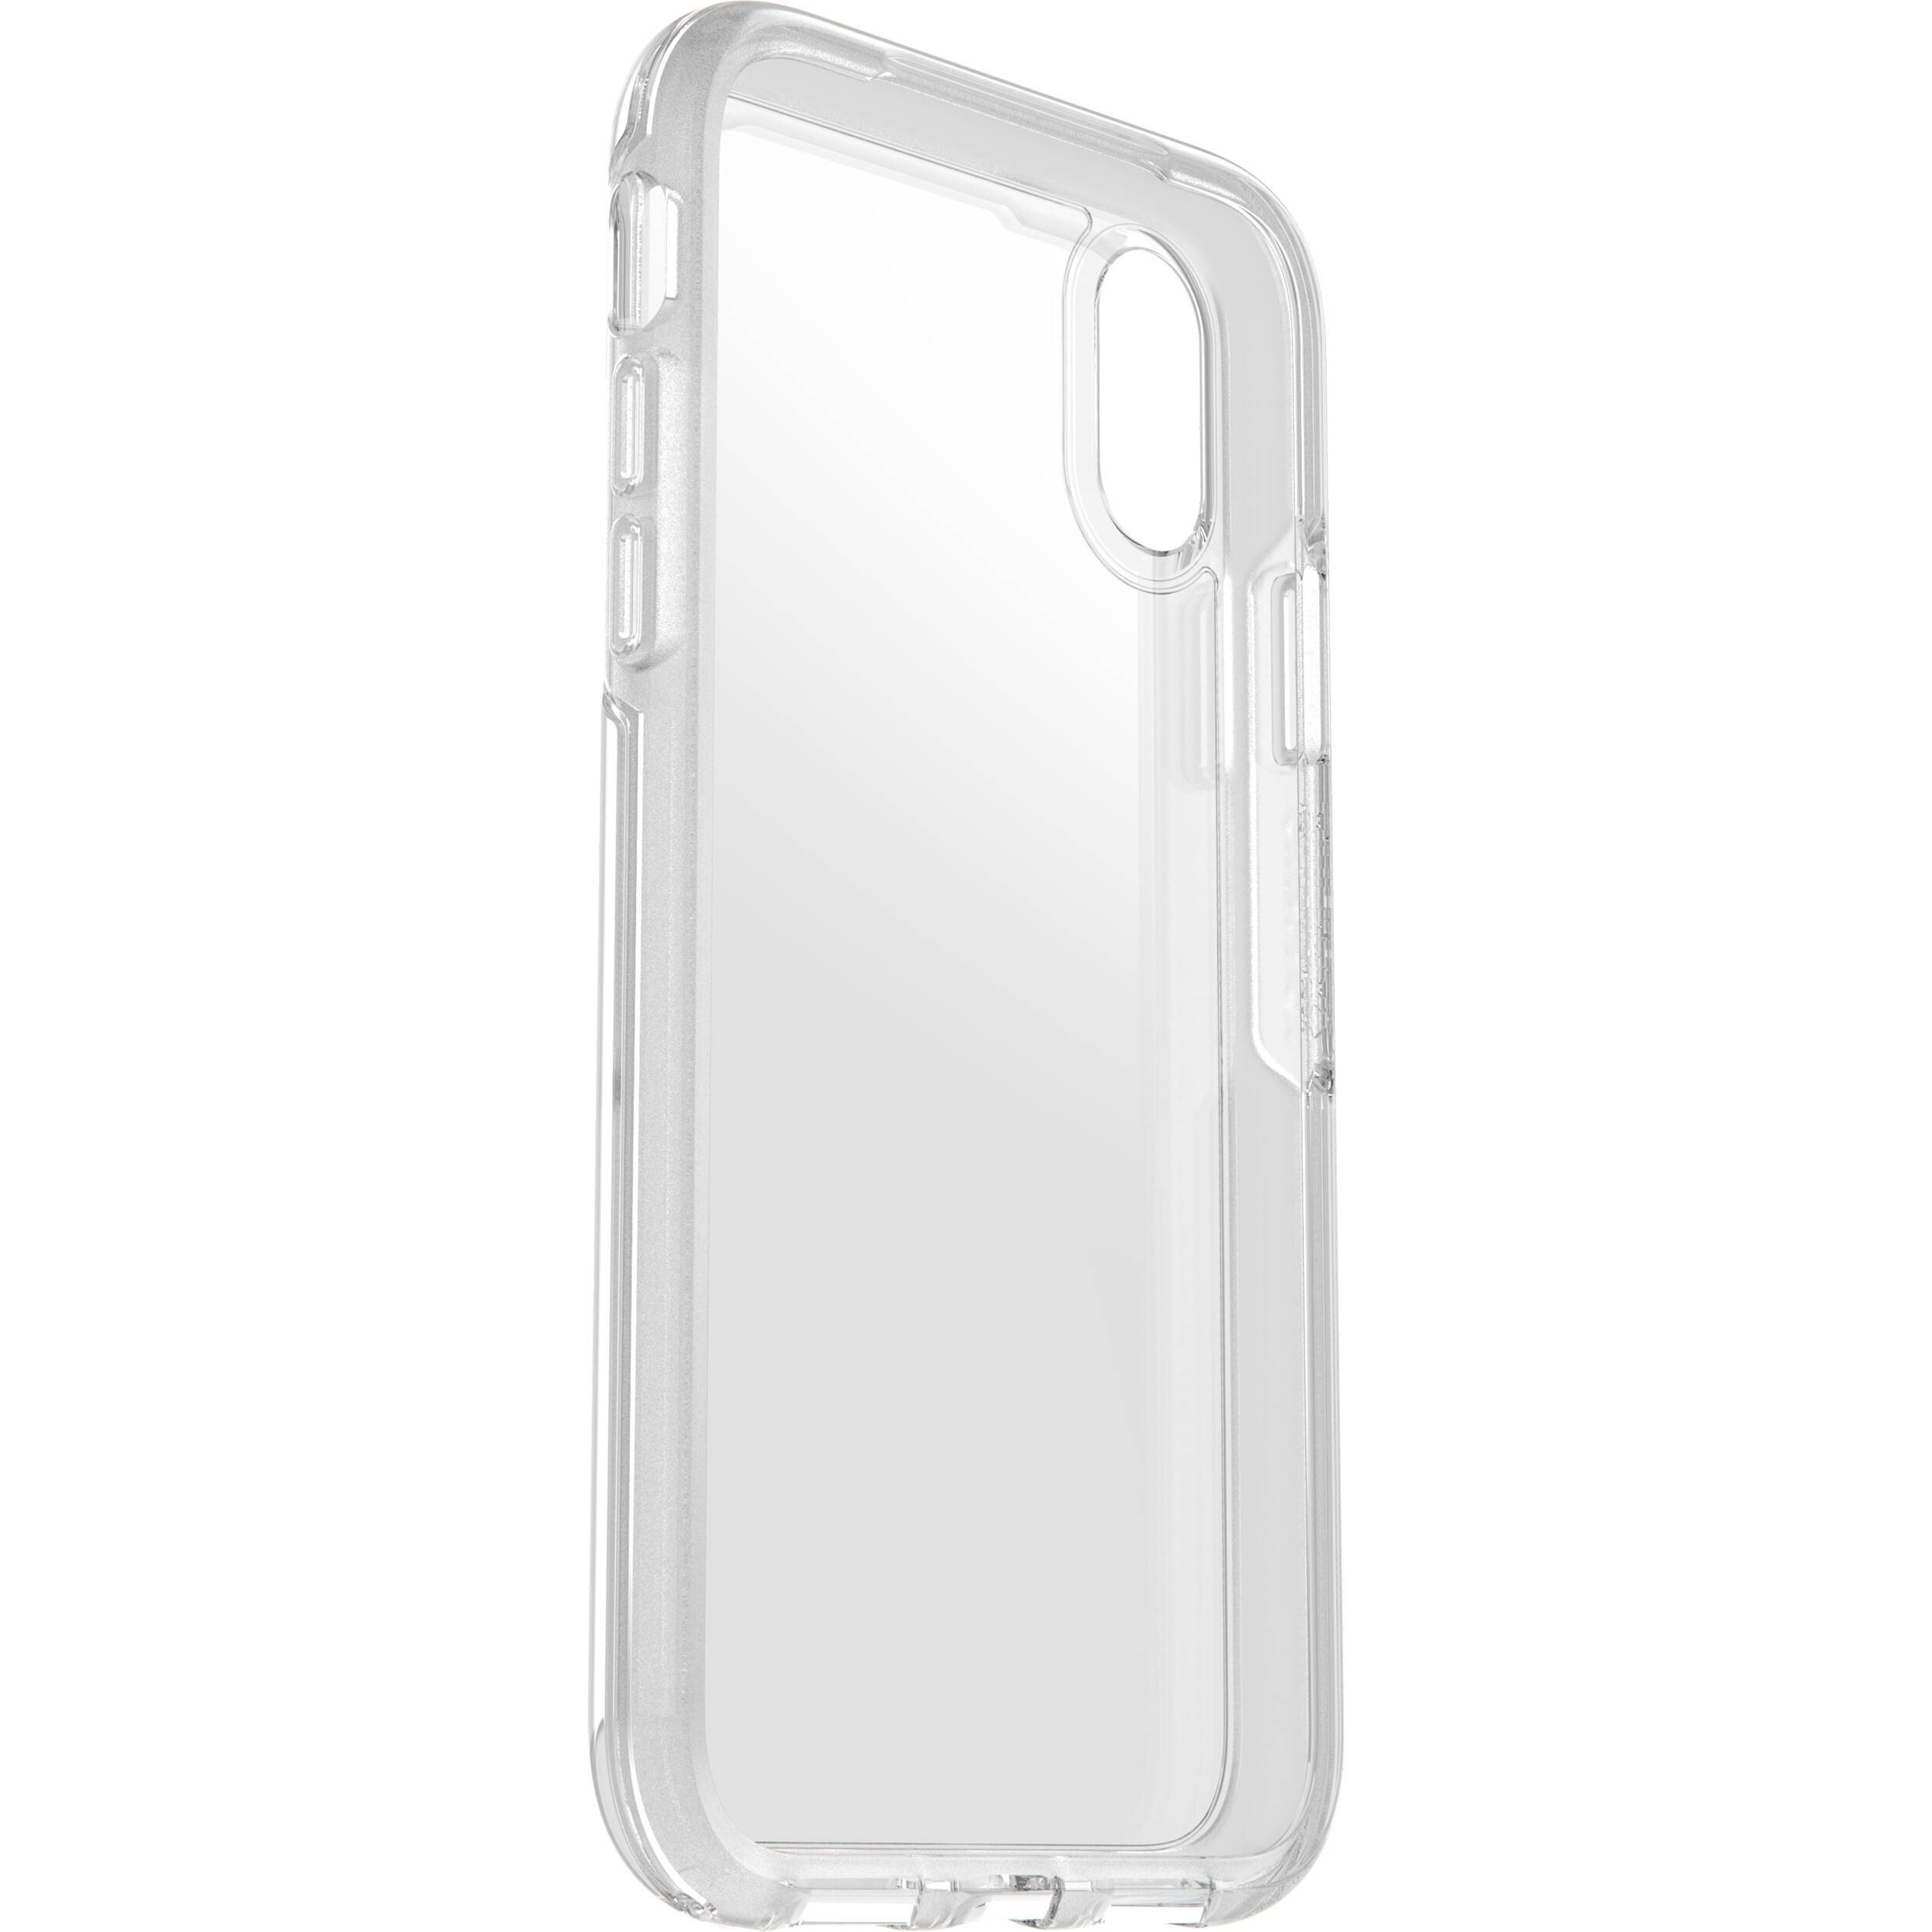 Otterbox Symmetry Series Clear Case For Iphone Xr Clear